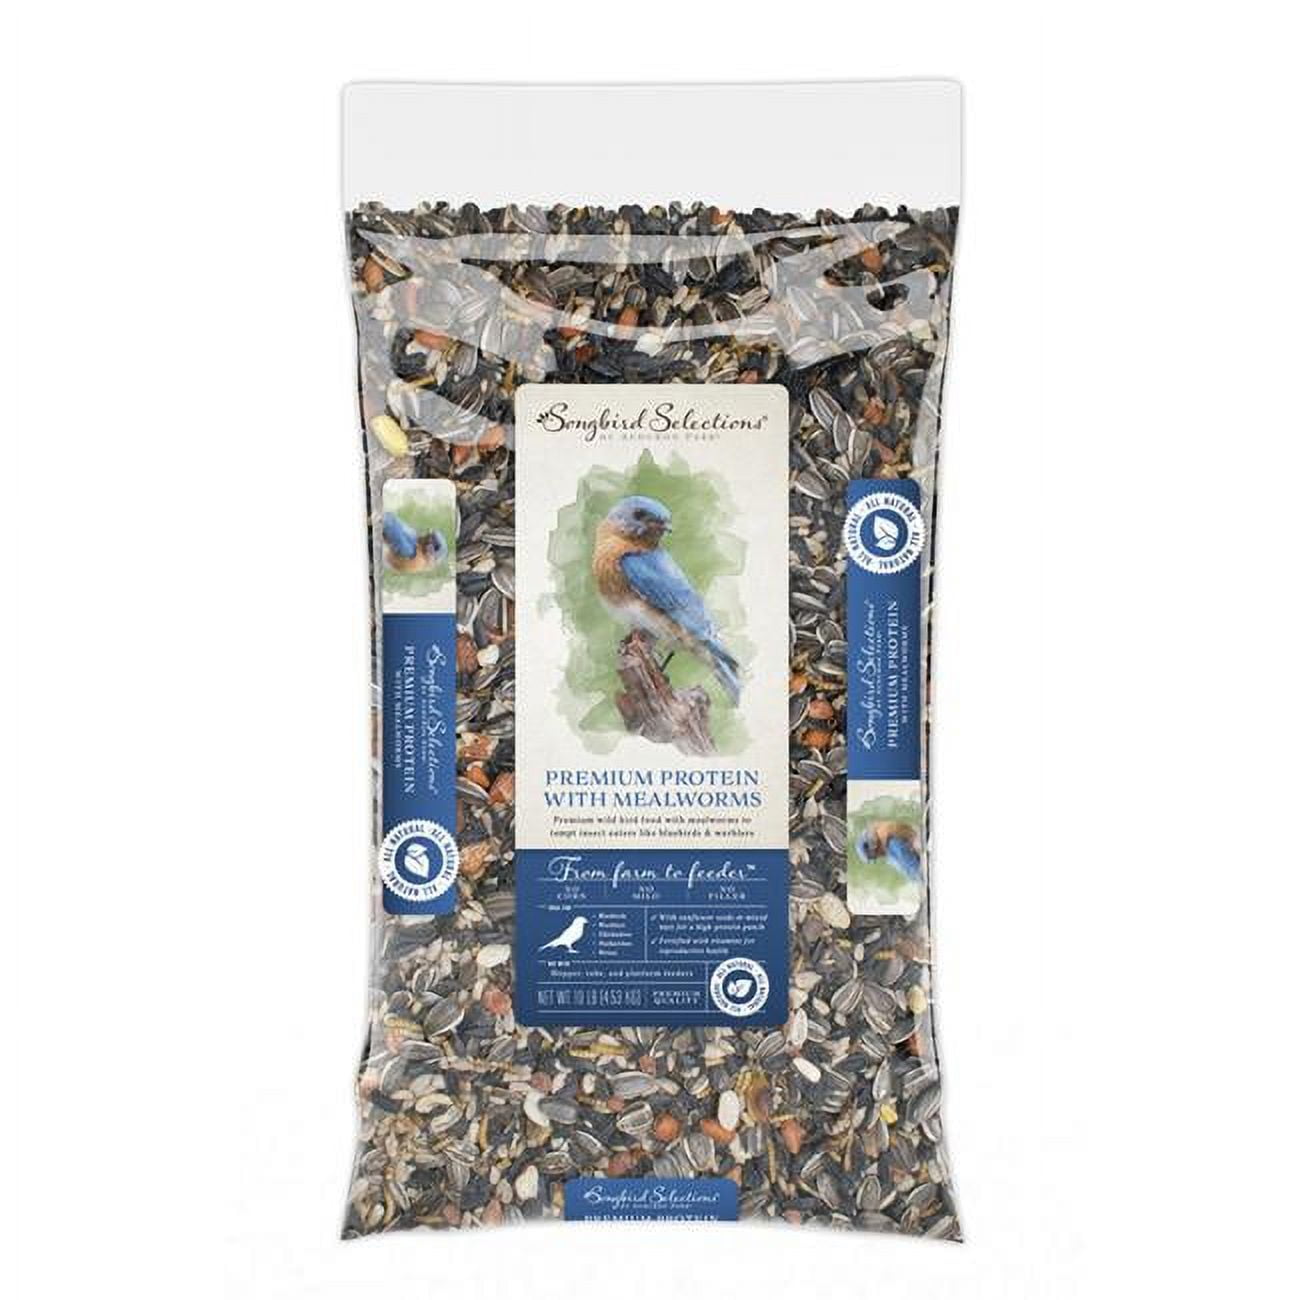 Picture of Global Harvest Foods 8039229 10 lbs Songbird Selections Chickadee & Nuthatch Wild Bird Food Mealworm